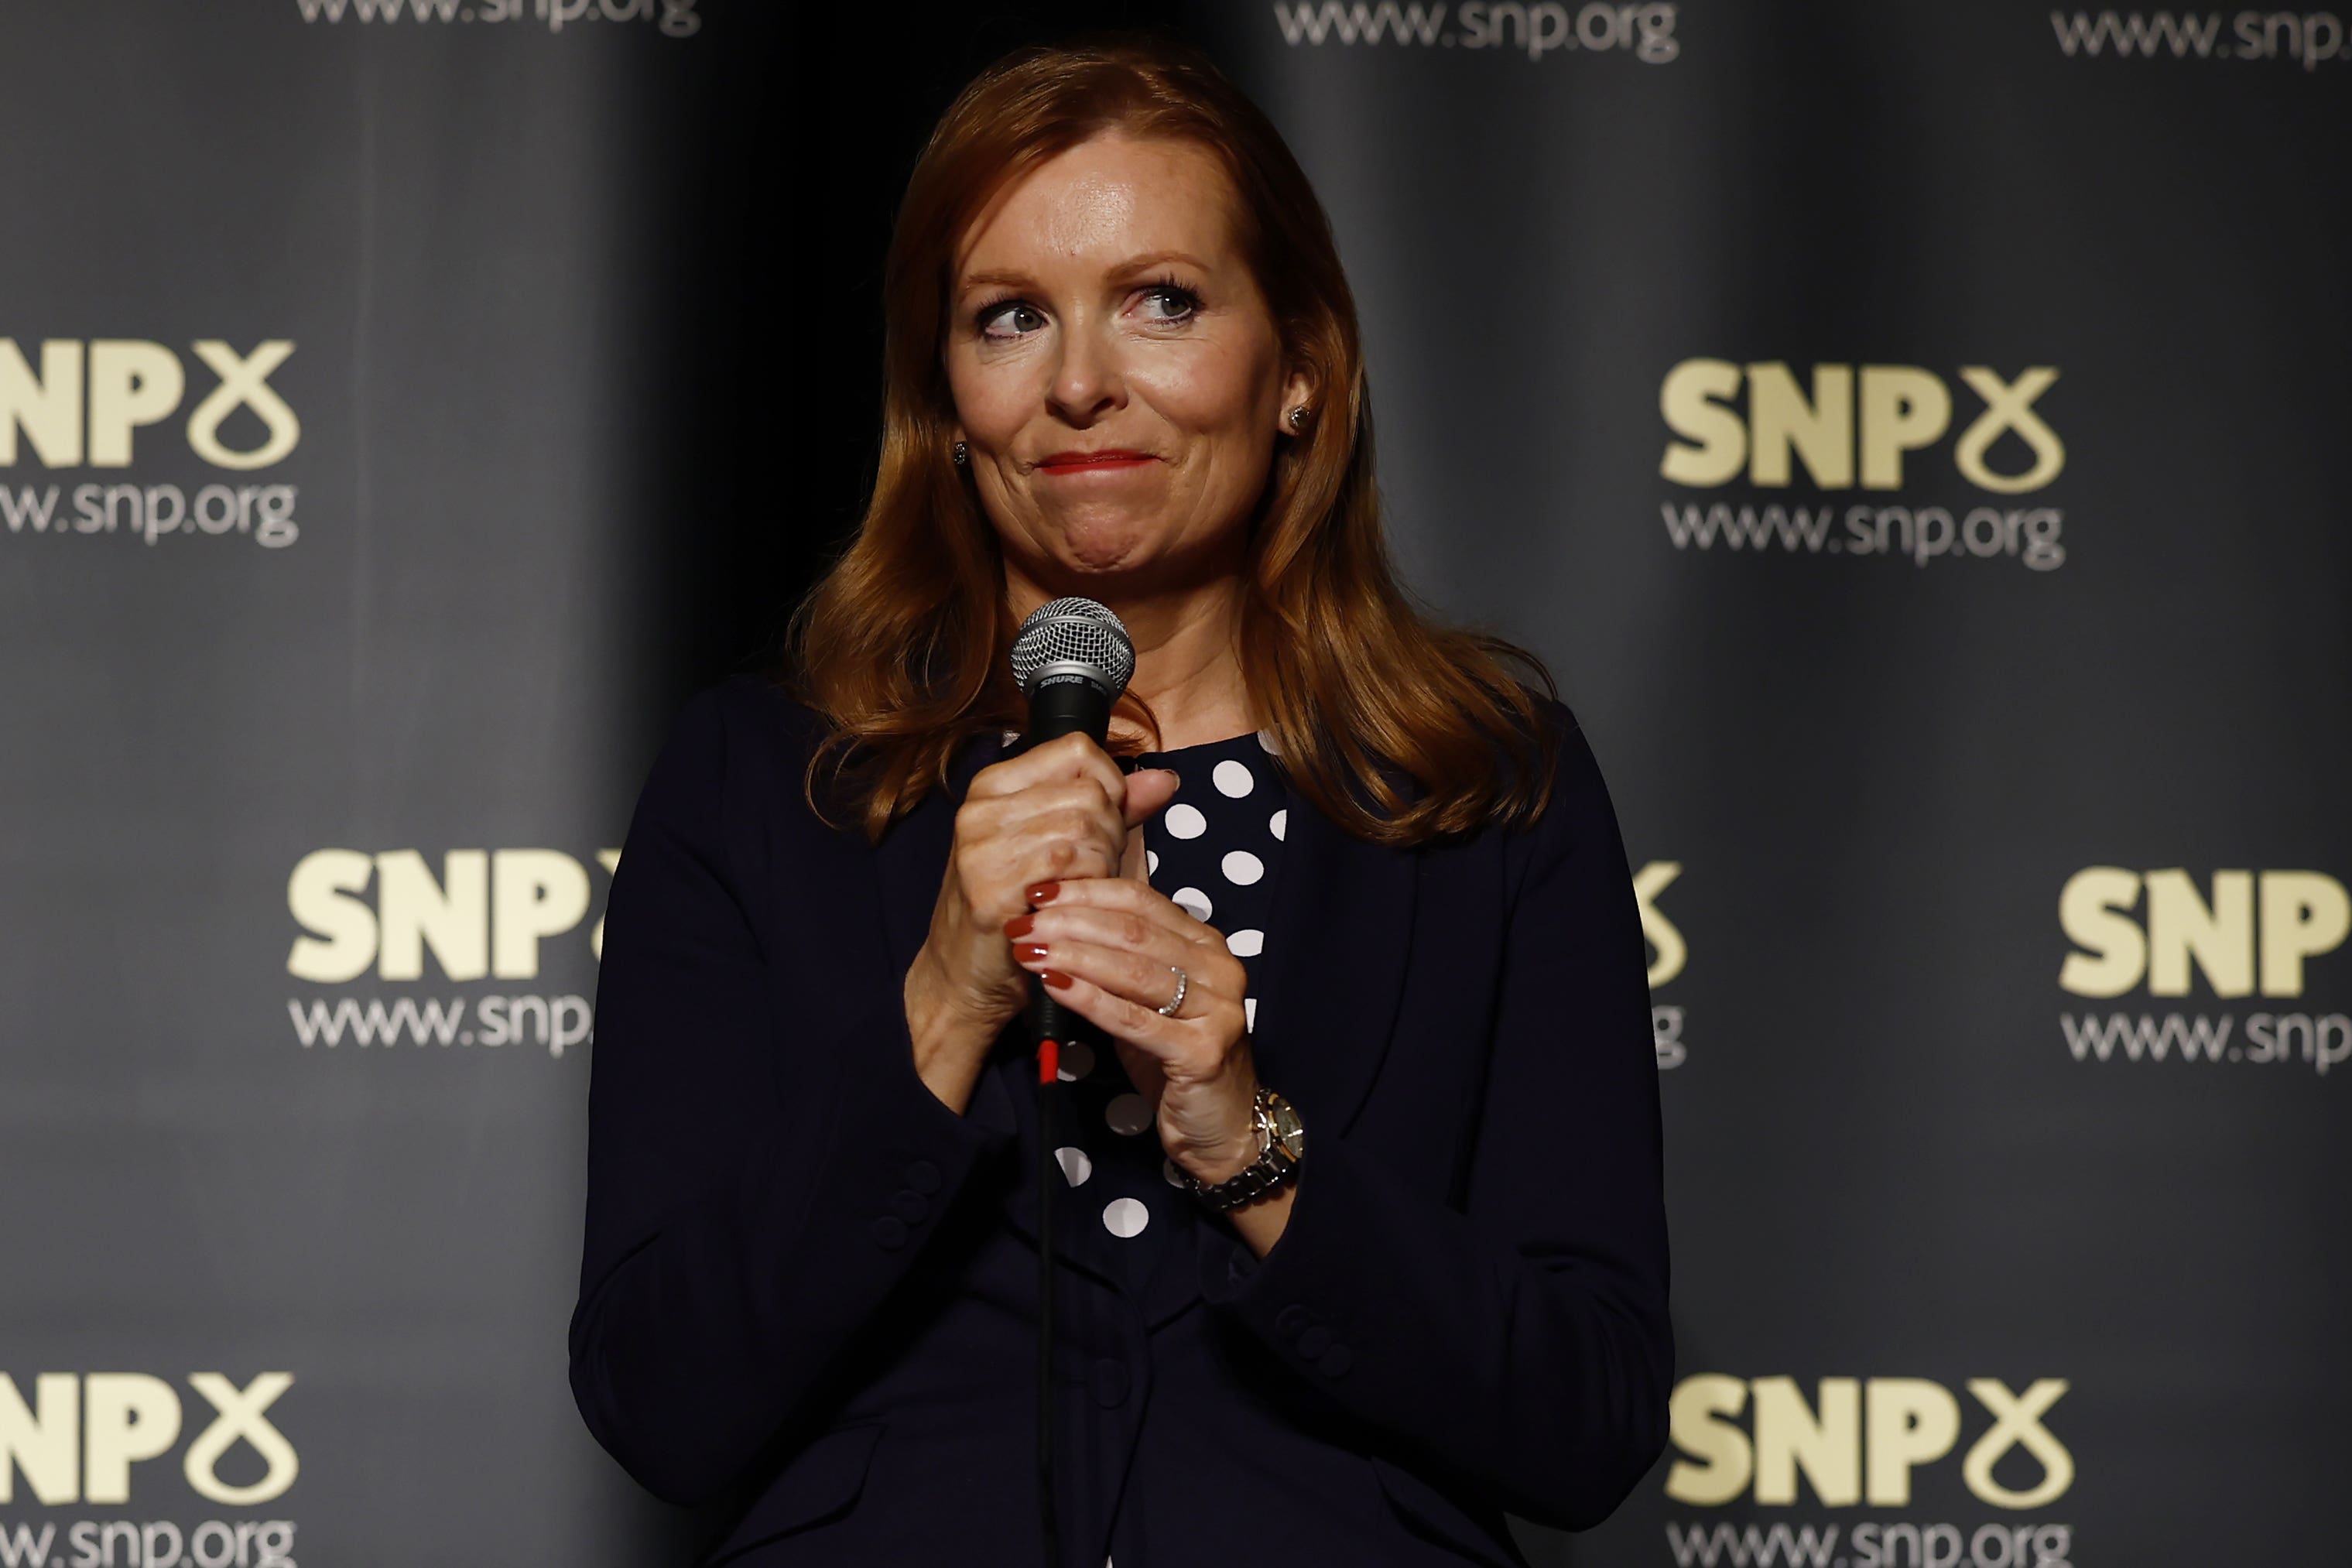 The SNP leadership candidate was taking part in the party’s second hustings event on Friday (Jeff J Mitchell/PA)